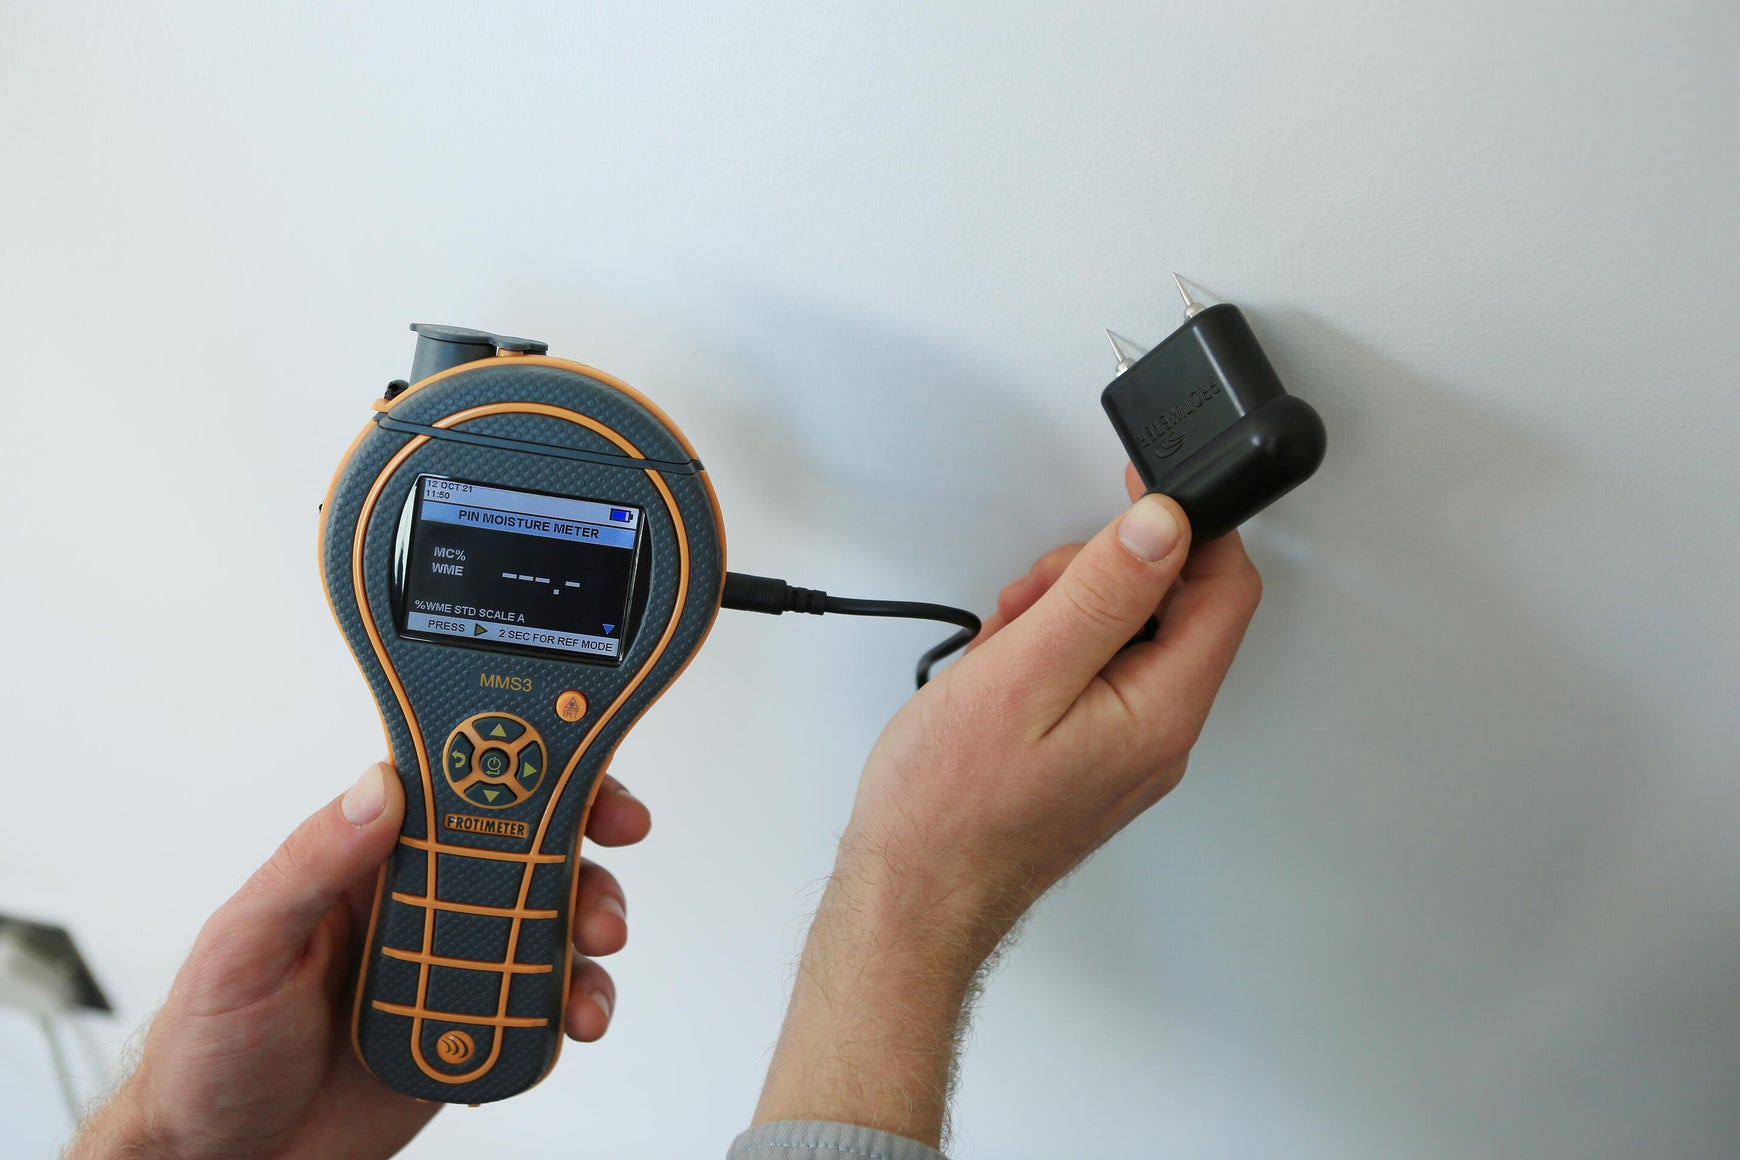 21 ways to check your moisture meter's accuracy